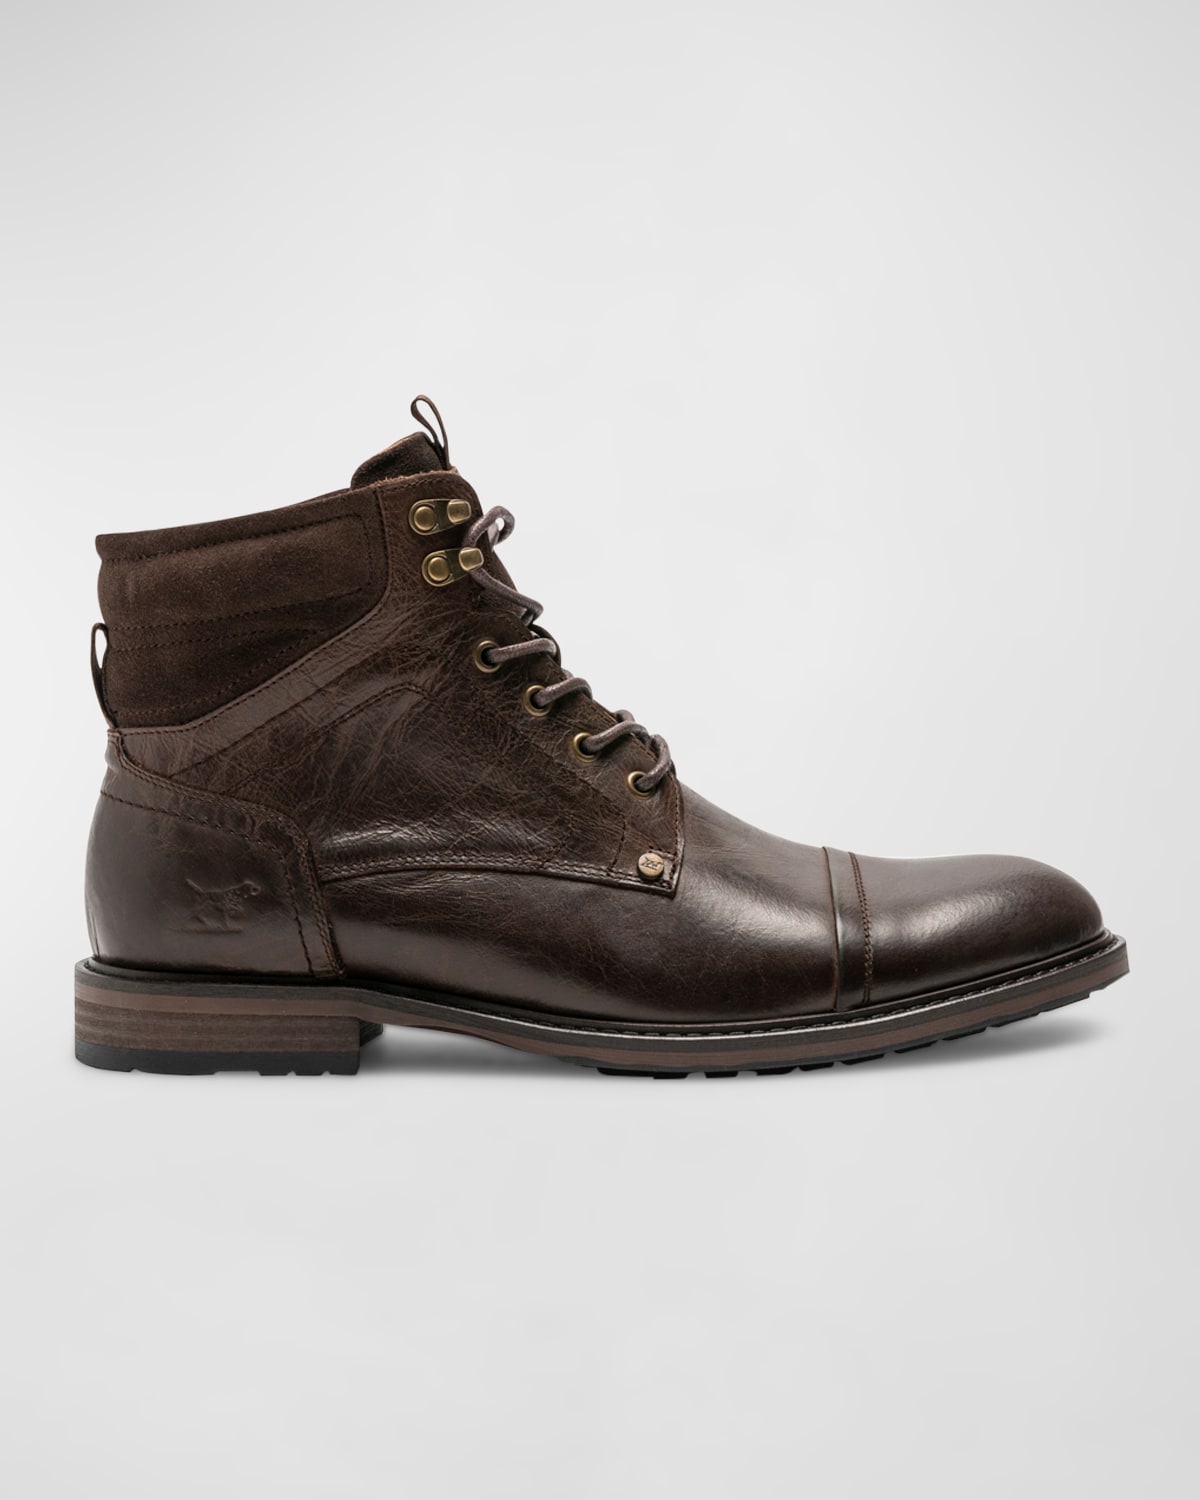 Men's Dunedin Leather Lace-Up Military Boots